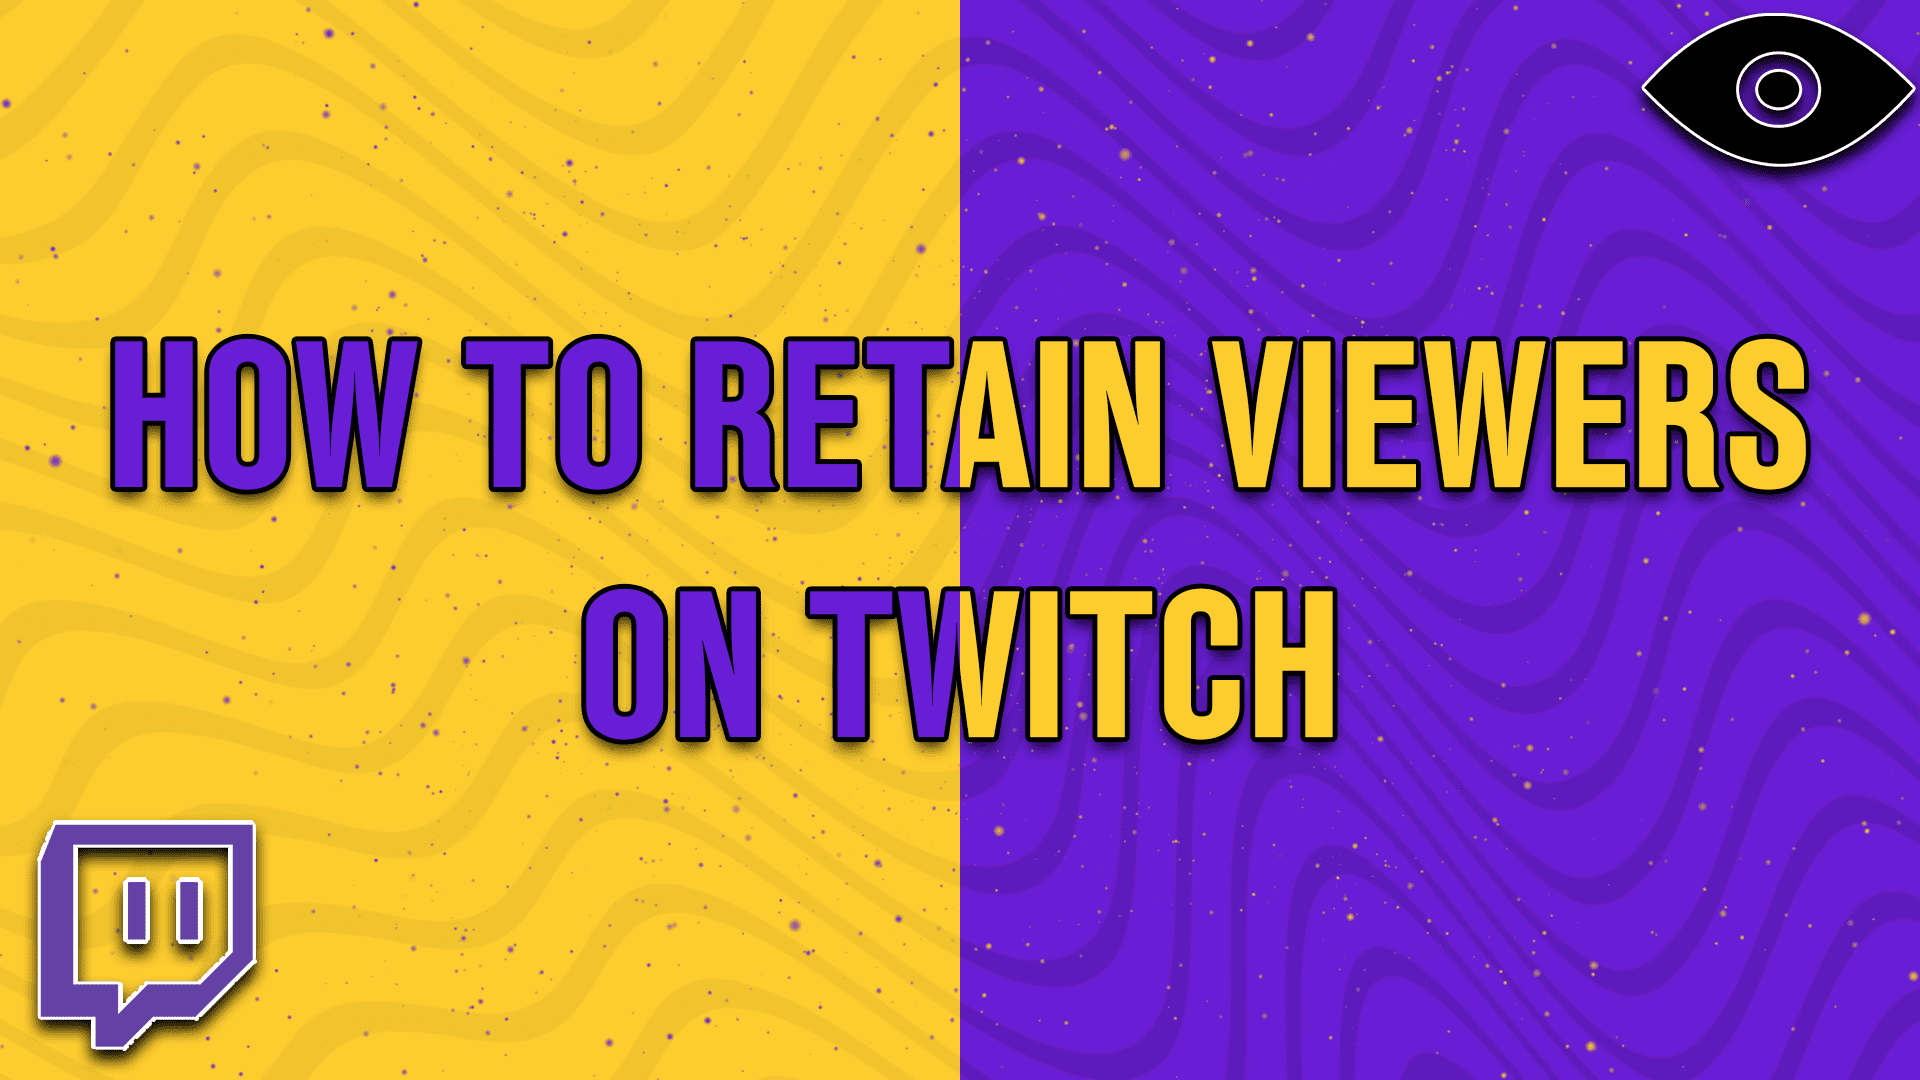 How to retain viewers on twitch - StreamBee